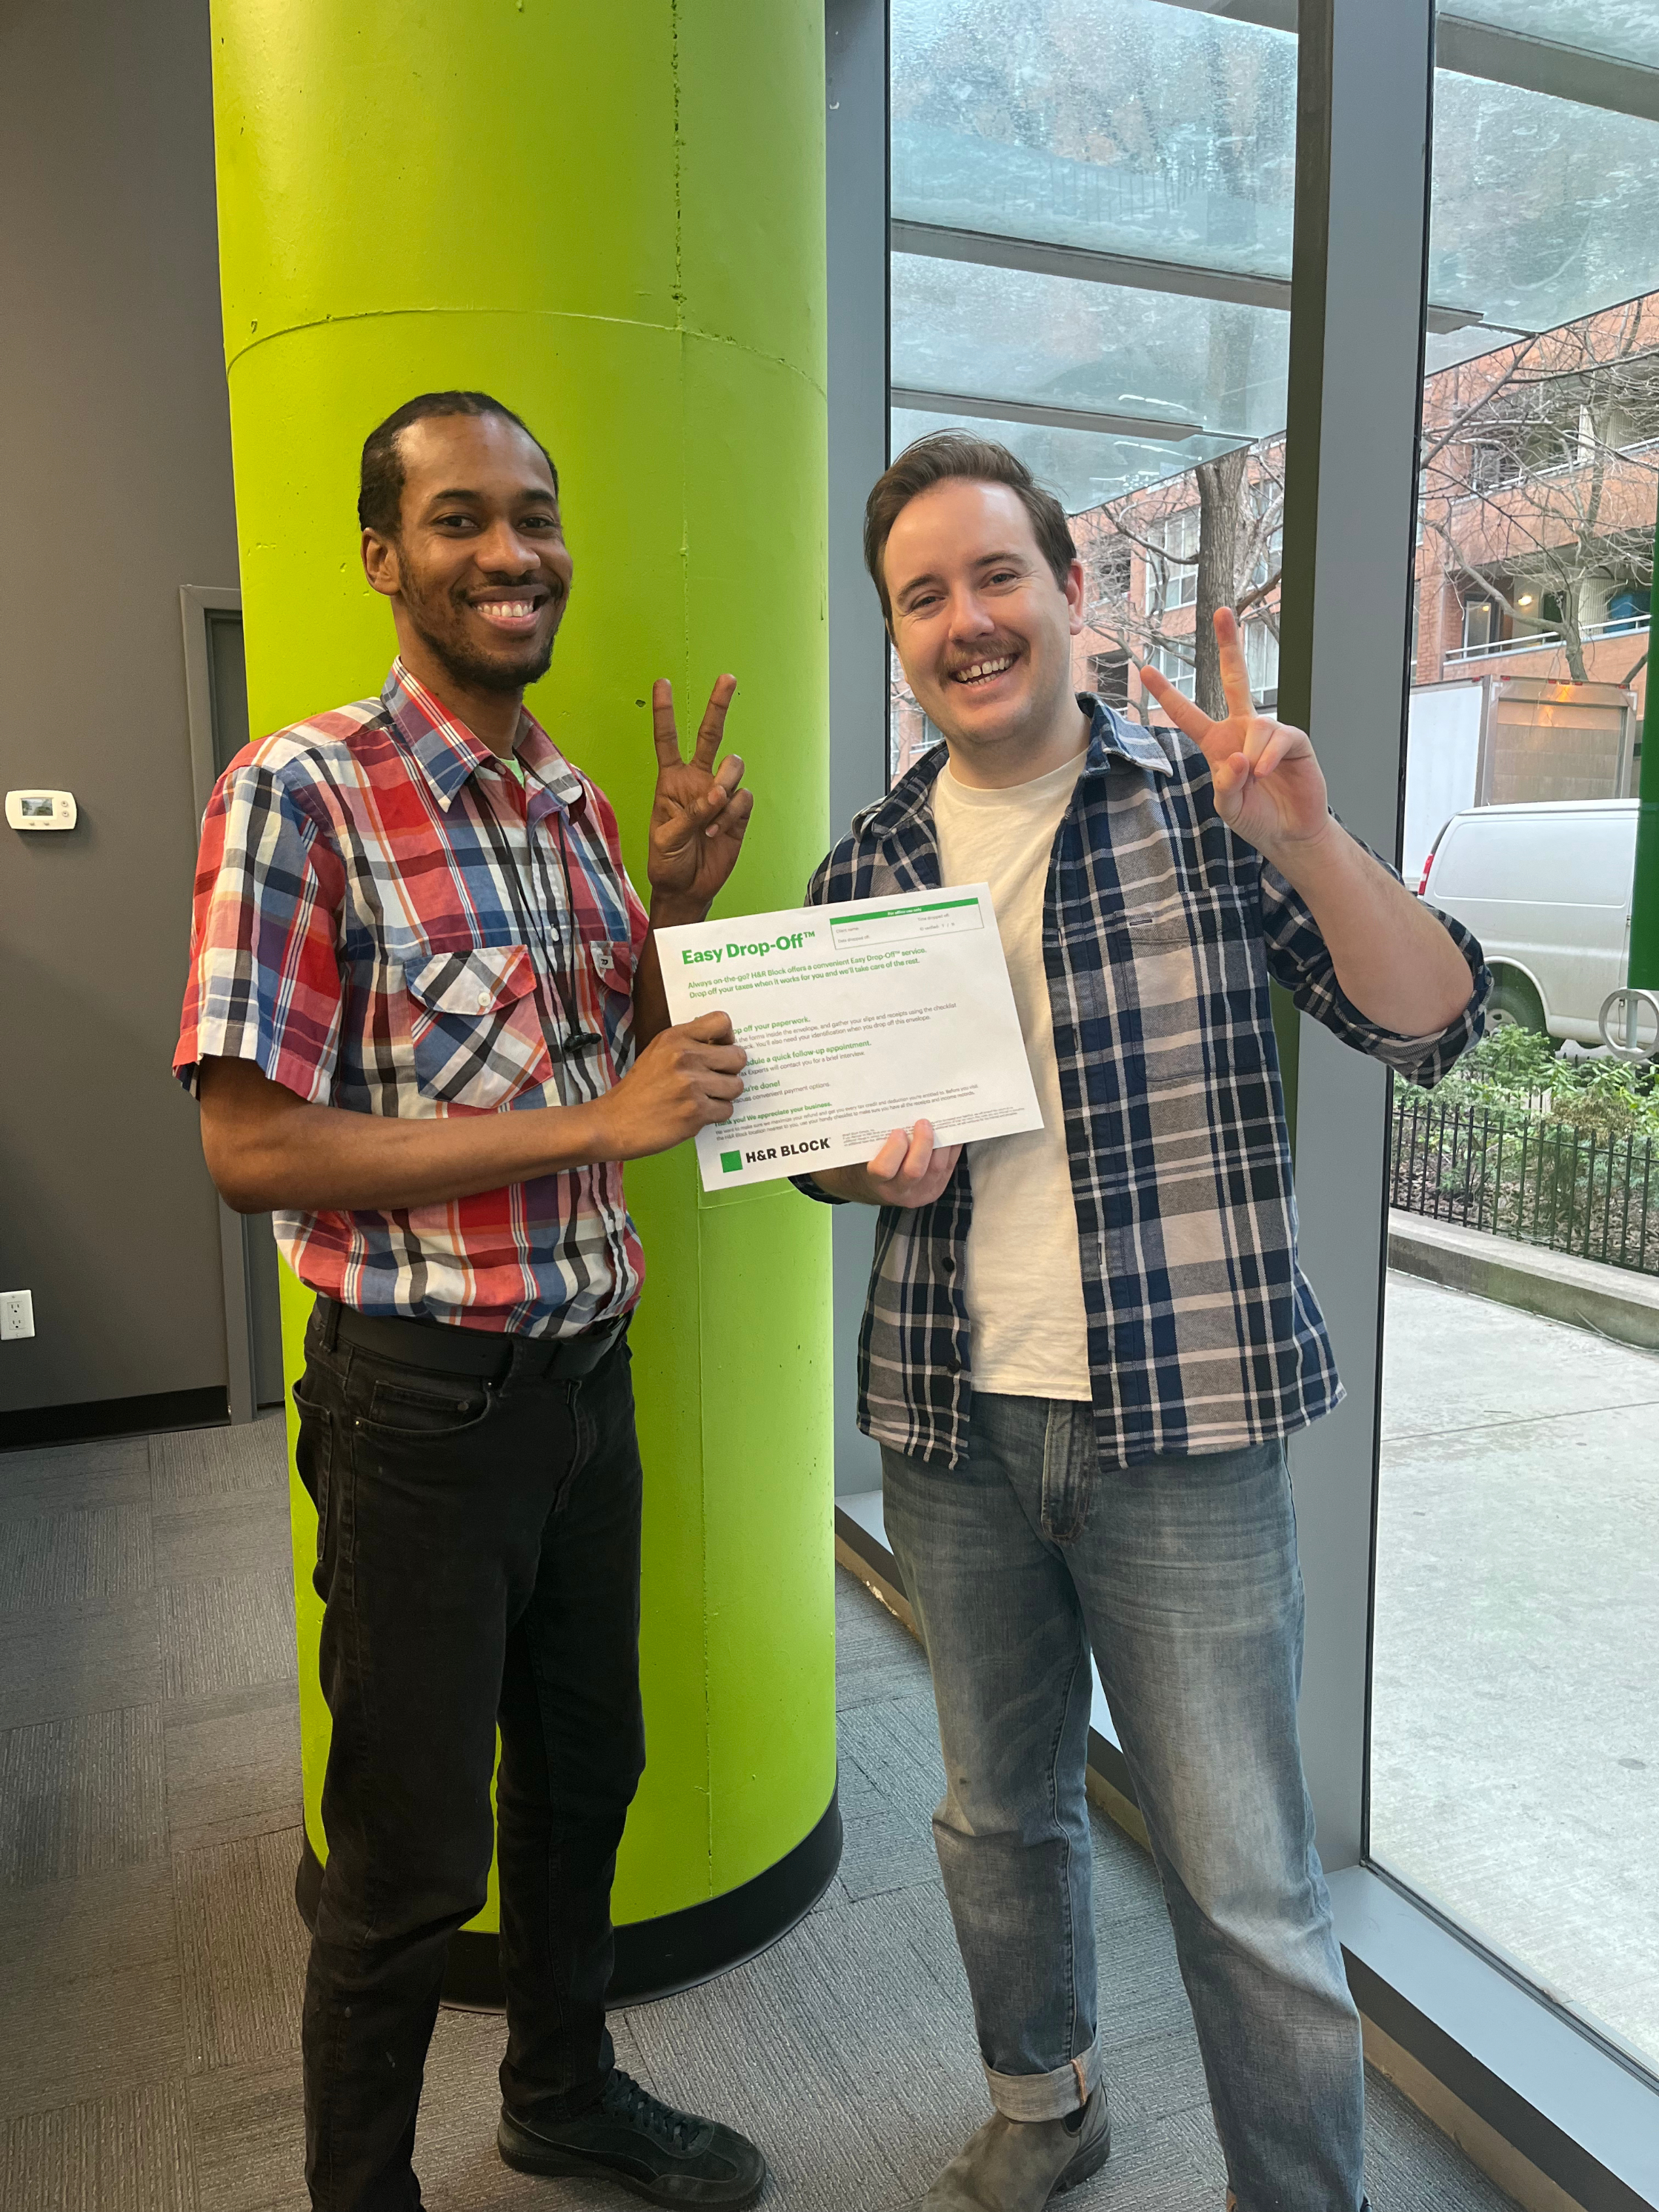 Two people smiling, one holding a certificate, standing indoors next to a pillar, both making peace signs